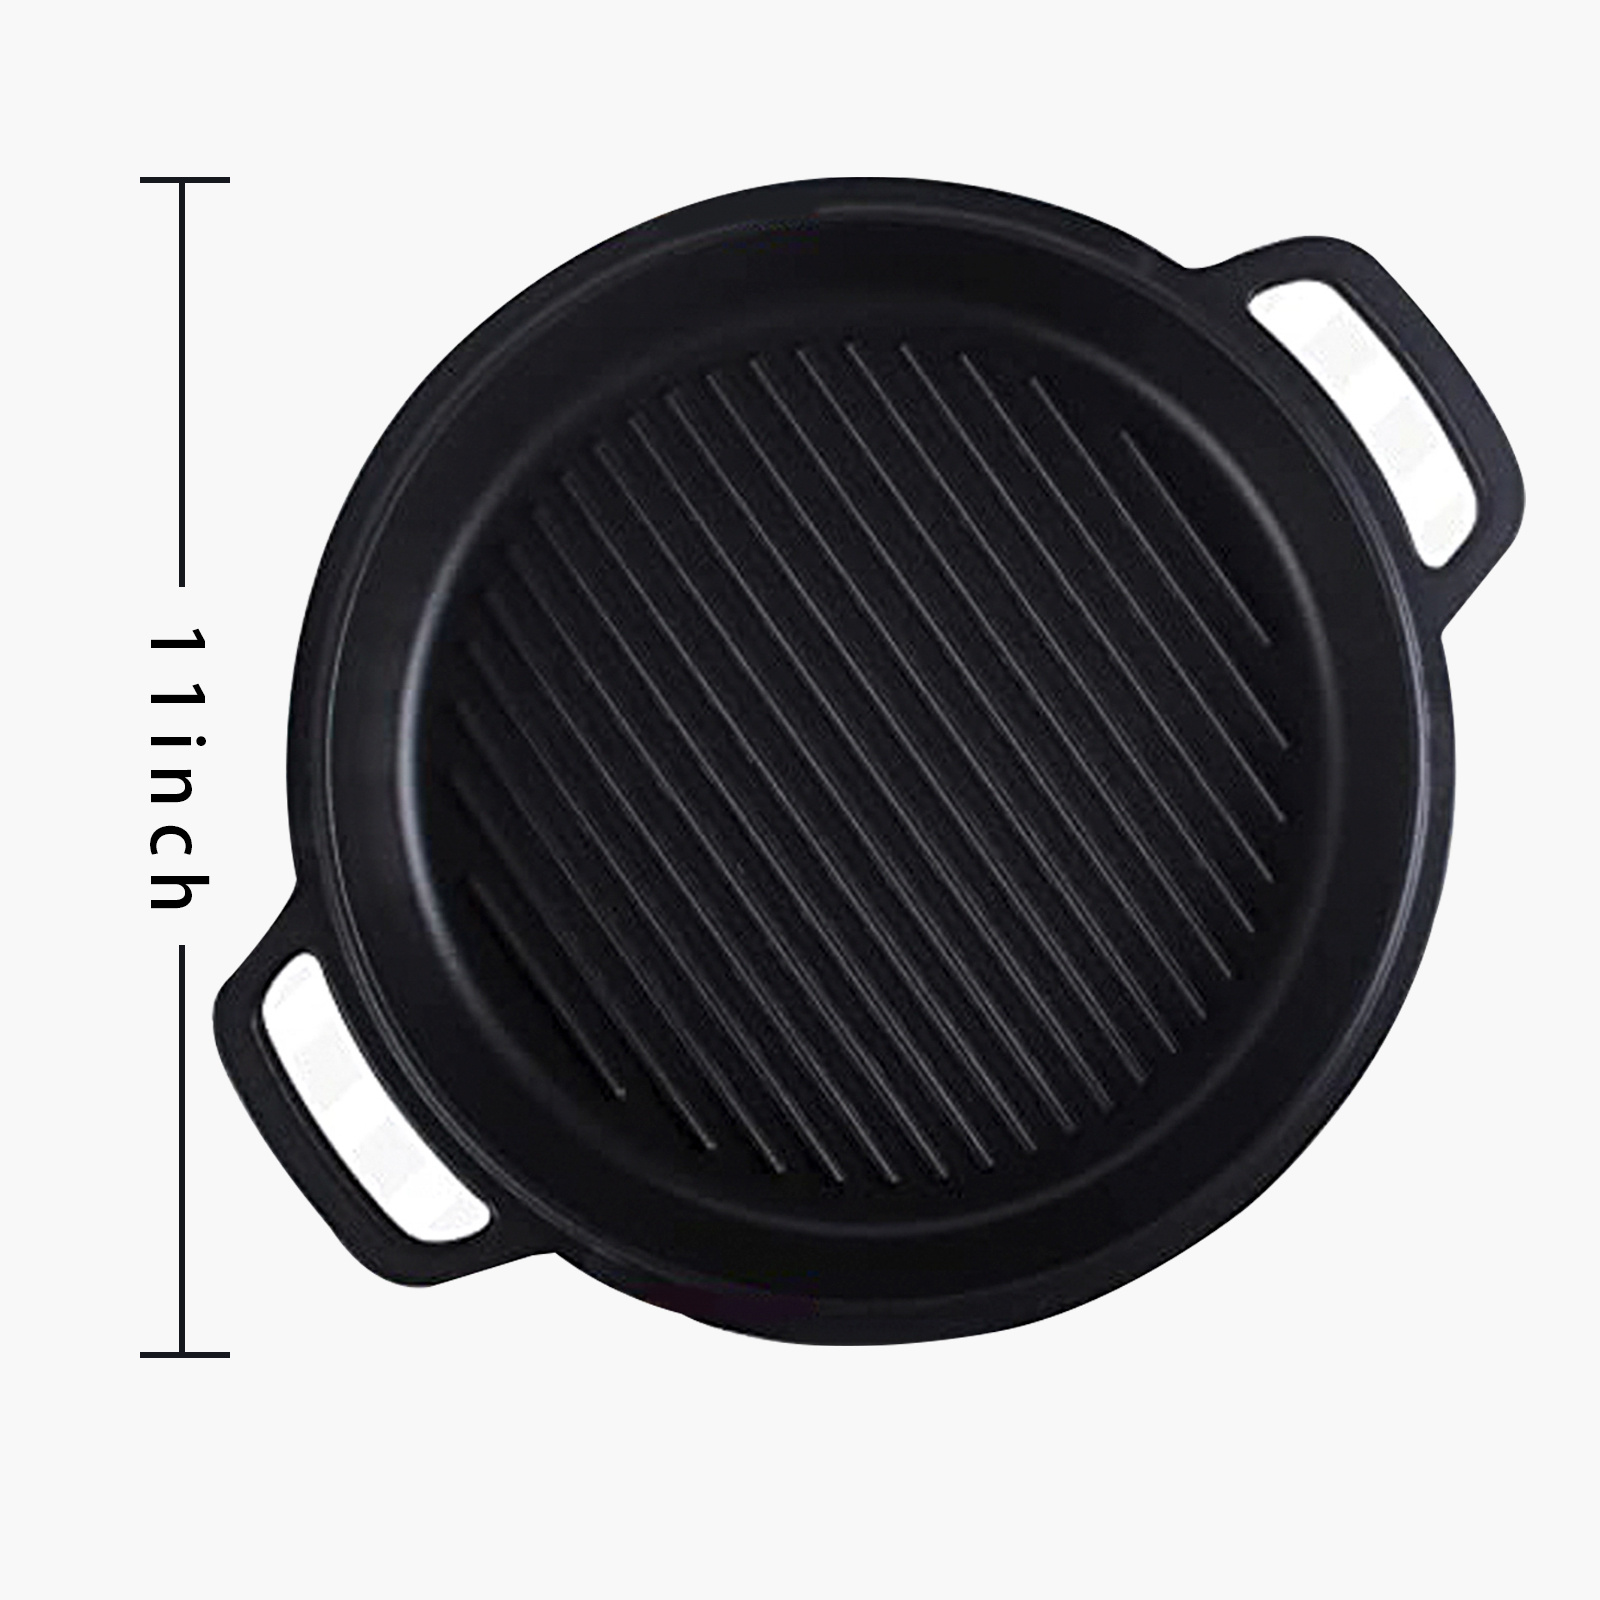 The Whatever Pan Cast Aluminum Griddle Pan for Stove Top - Lighter than  Cast Iron Skillet Pancake Griddle with Lid